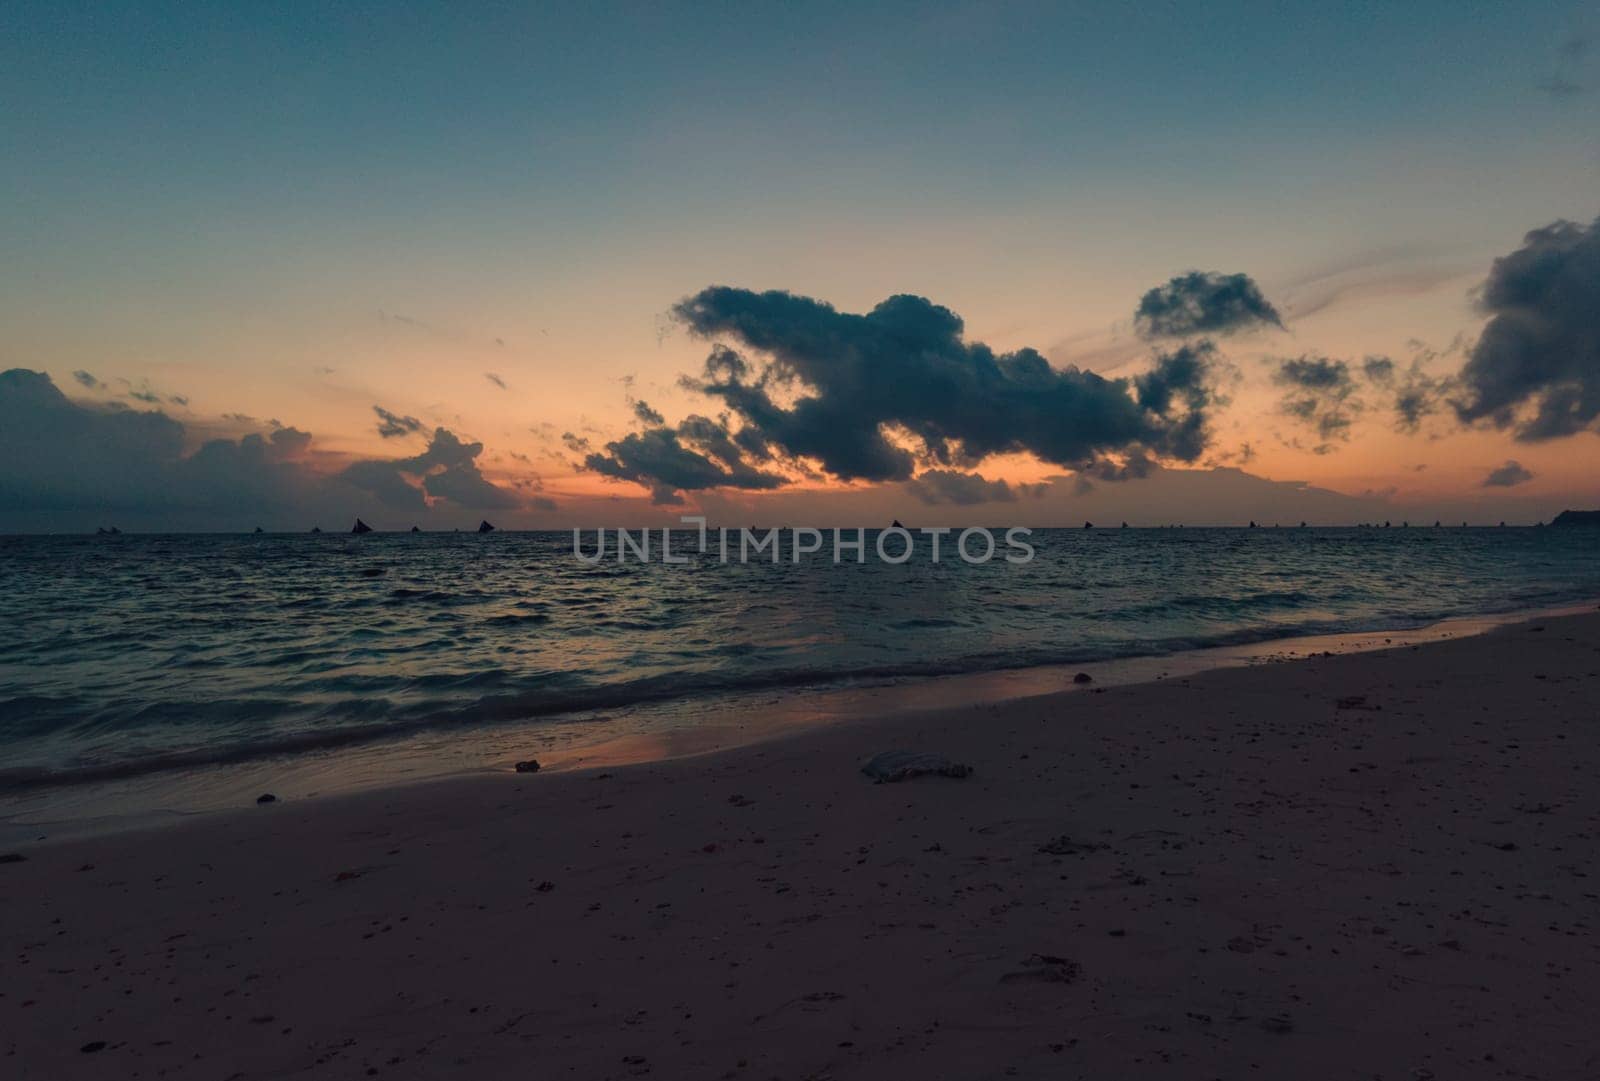 Calm evening on a sandy beach with boats sailing in the distance. Boracay, Philippines. by Busker